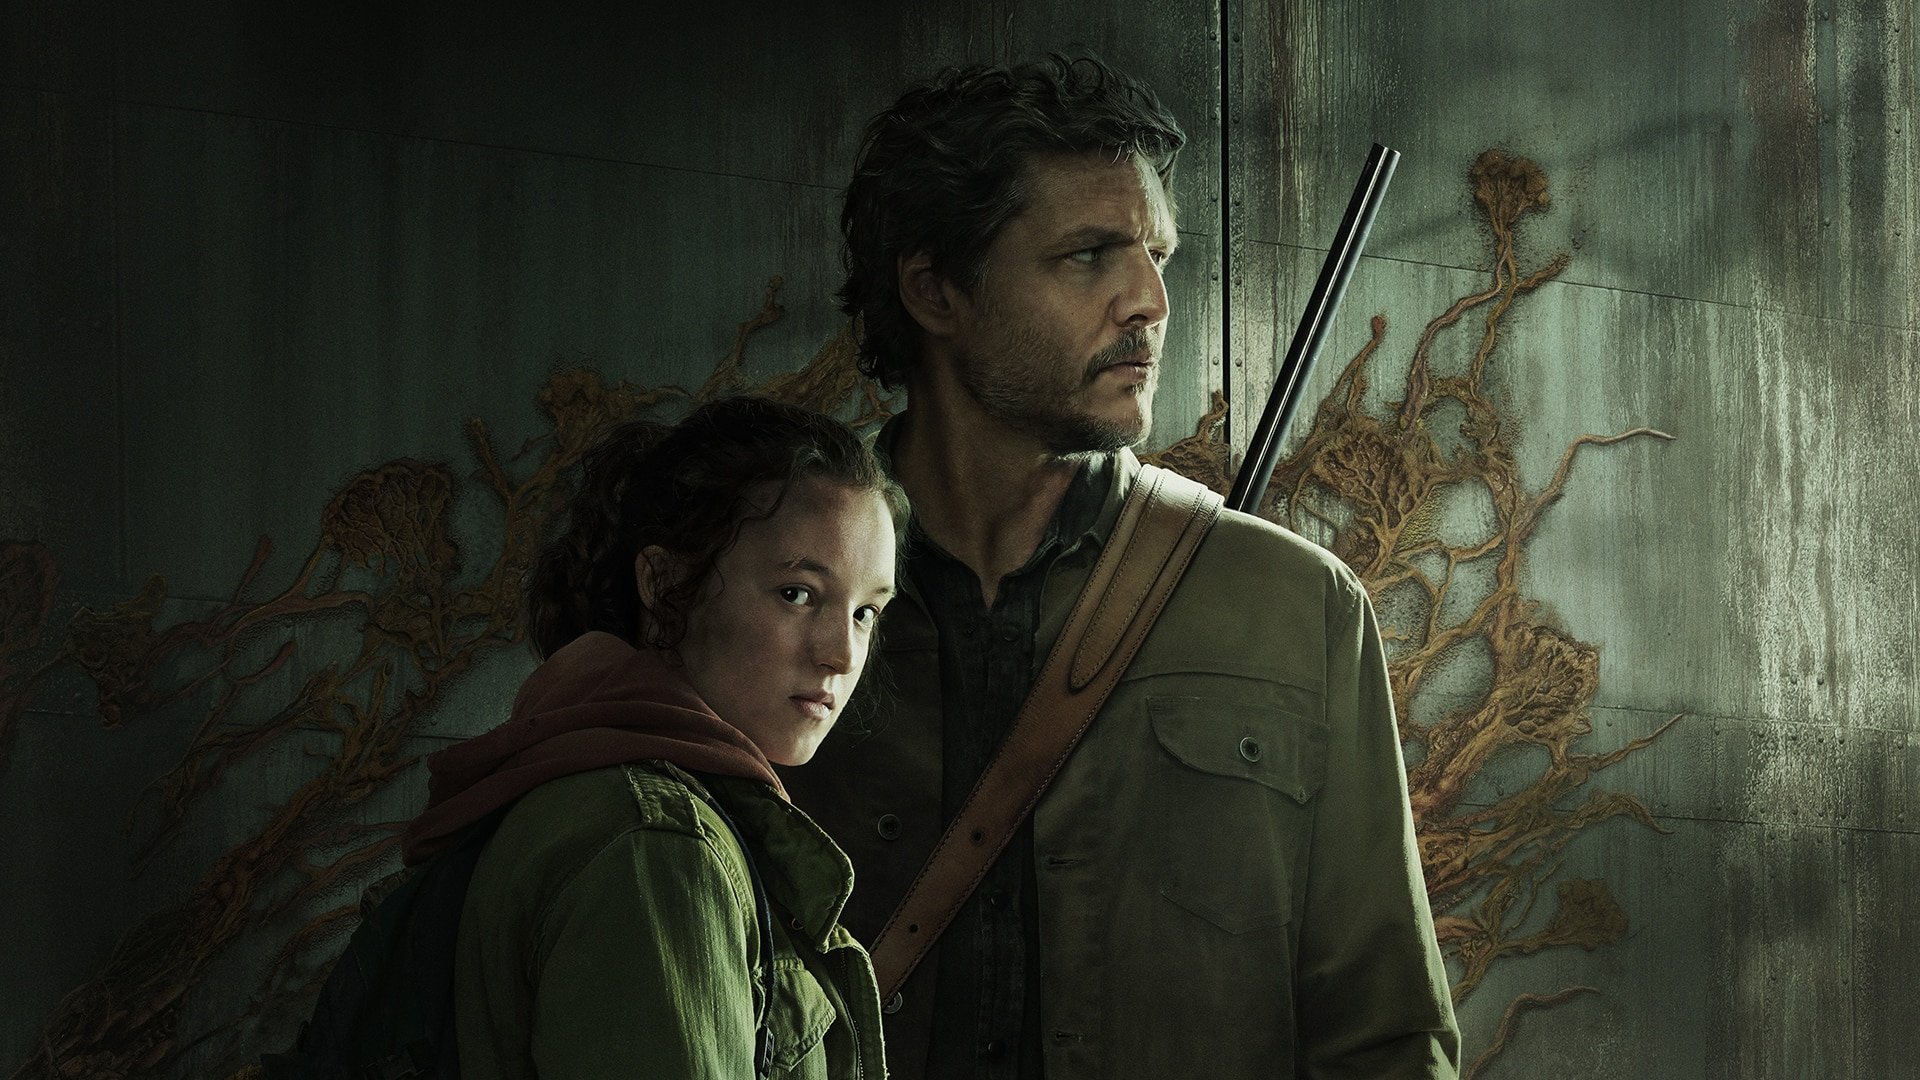 The Last of Us finale is the most-watched in a U.S. debut on Sky